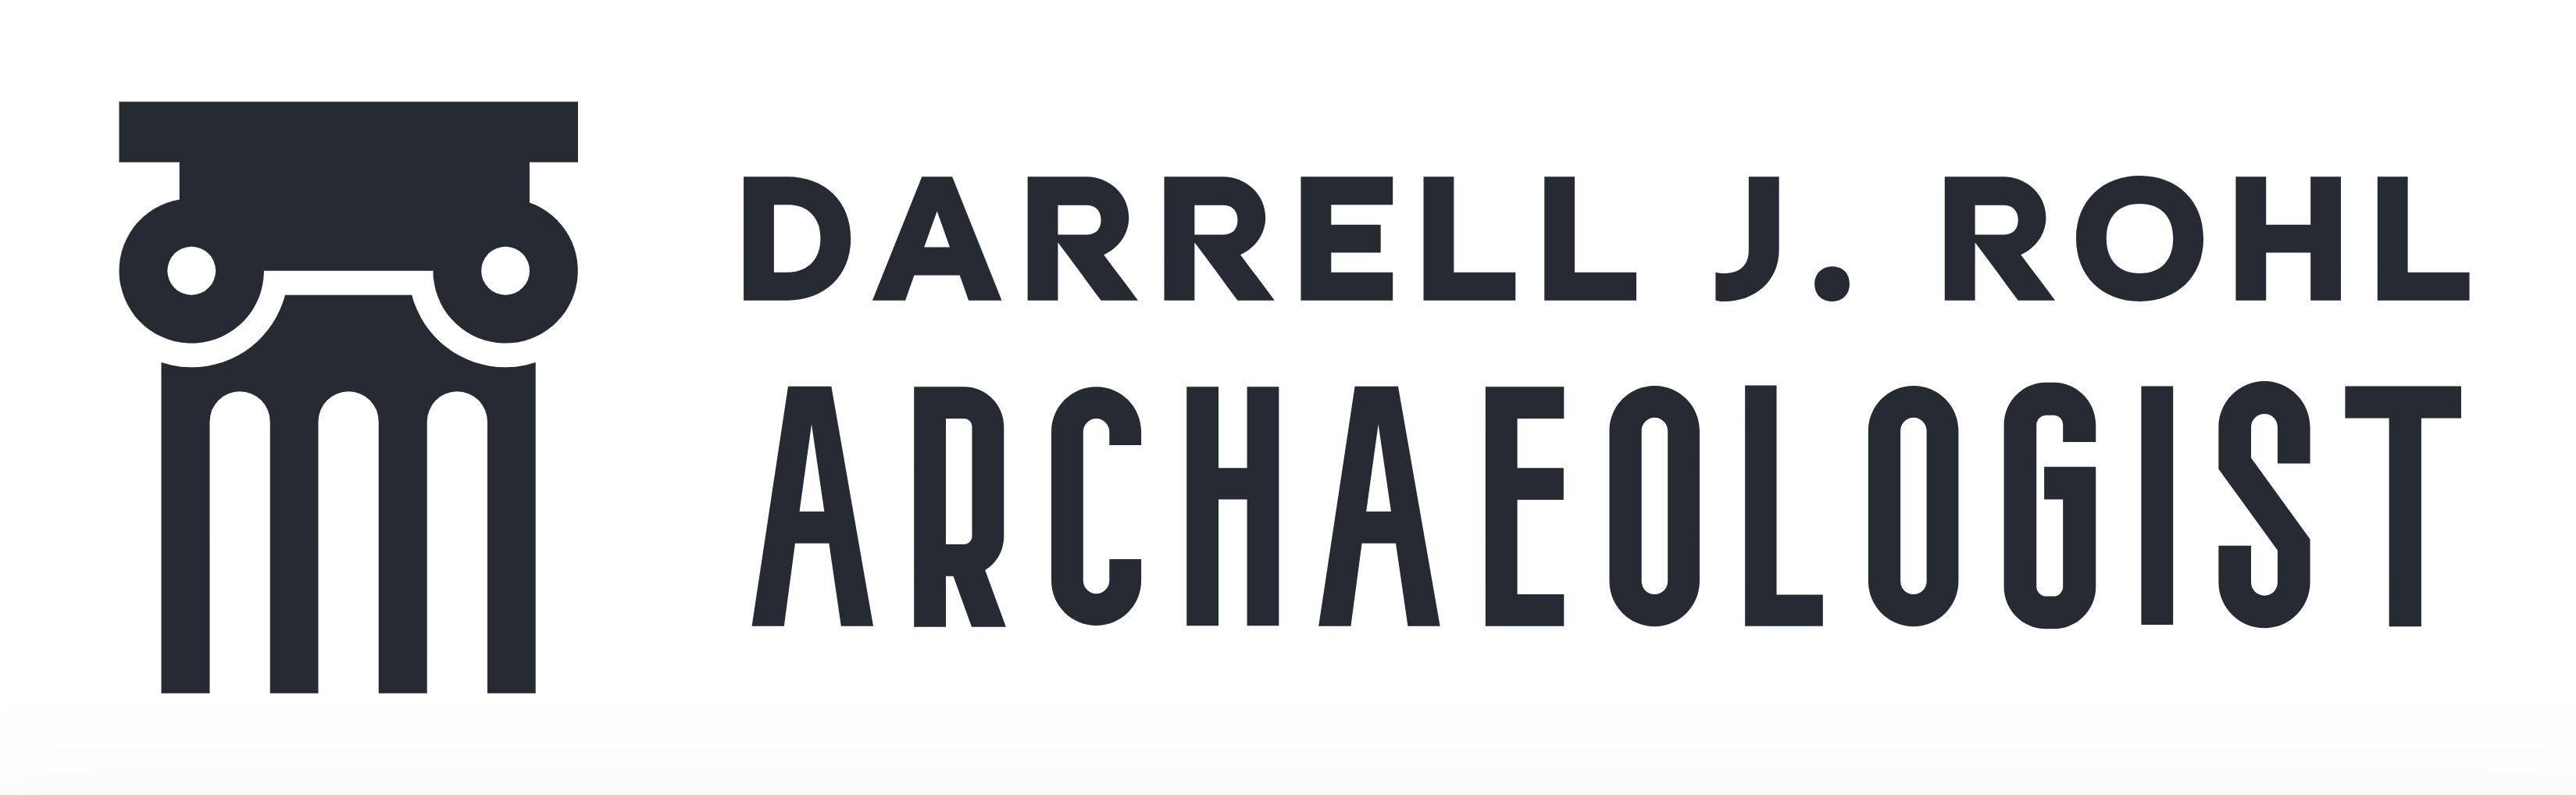 image logo with a classical column and the words "Darrell J. Rohl, Archaeologist"